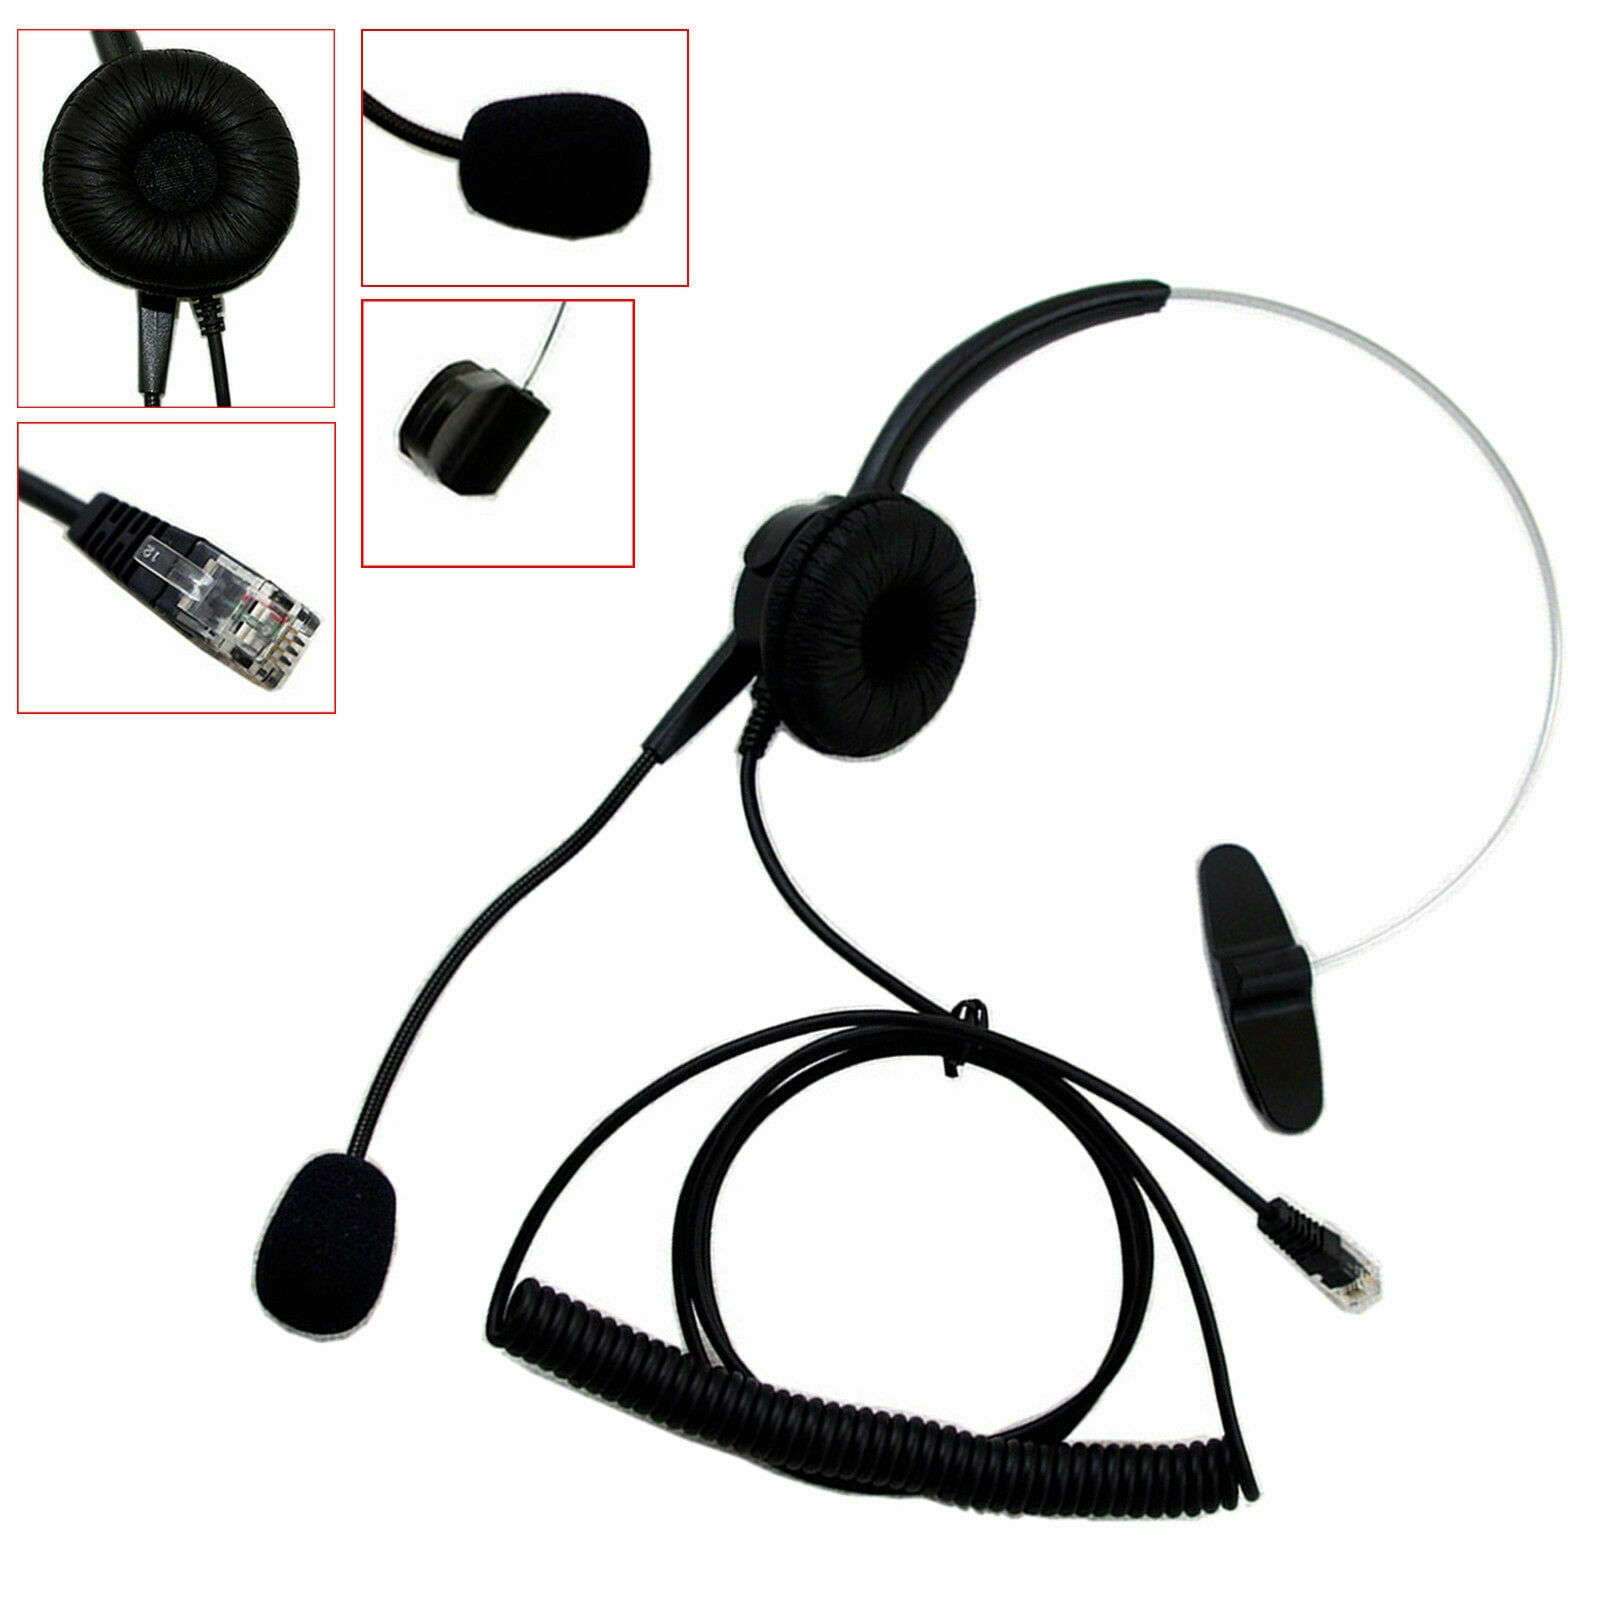 Replacement Headset for Plantronics A100 T10 T20 T110 S11 S12 Telephone Silver 